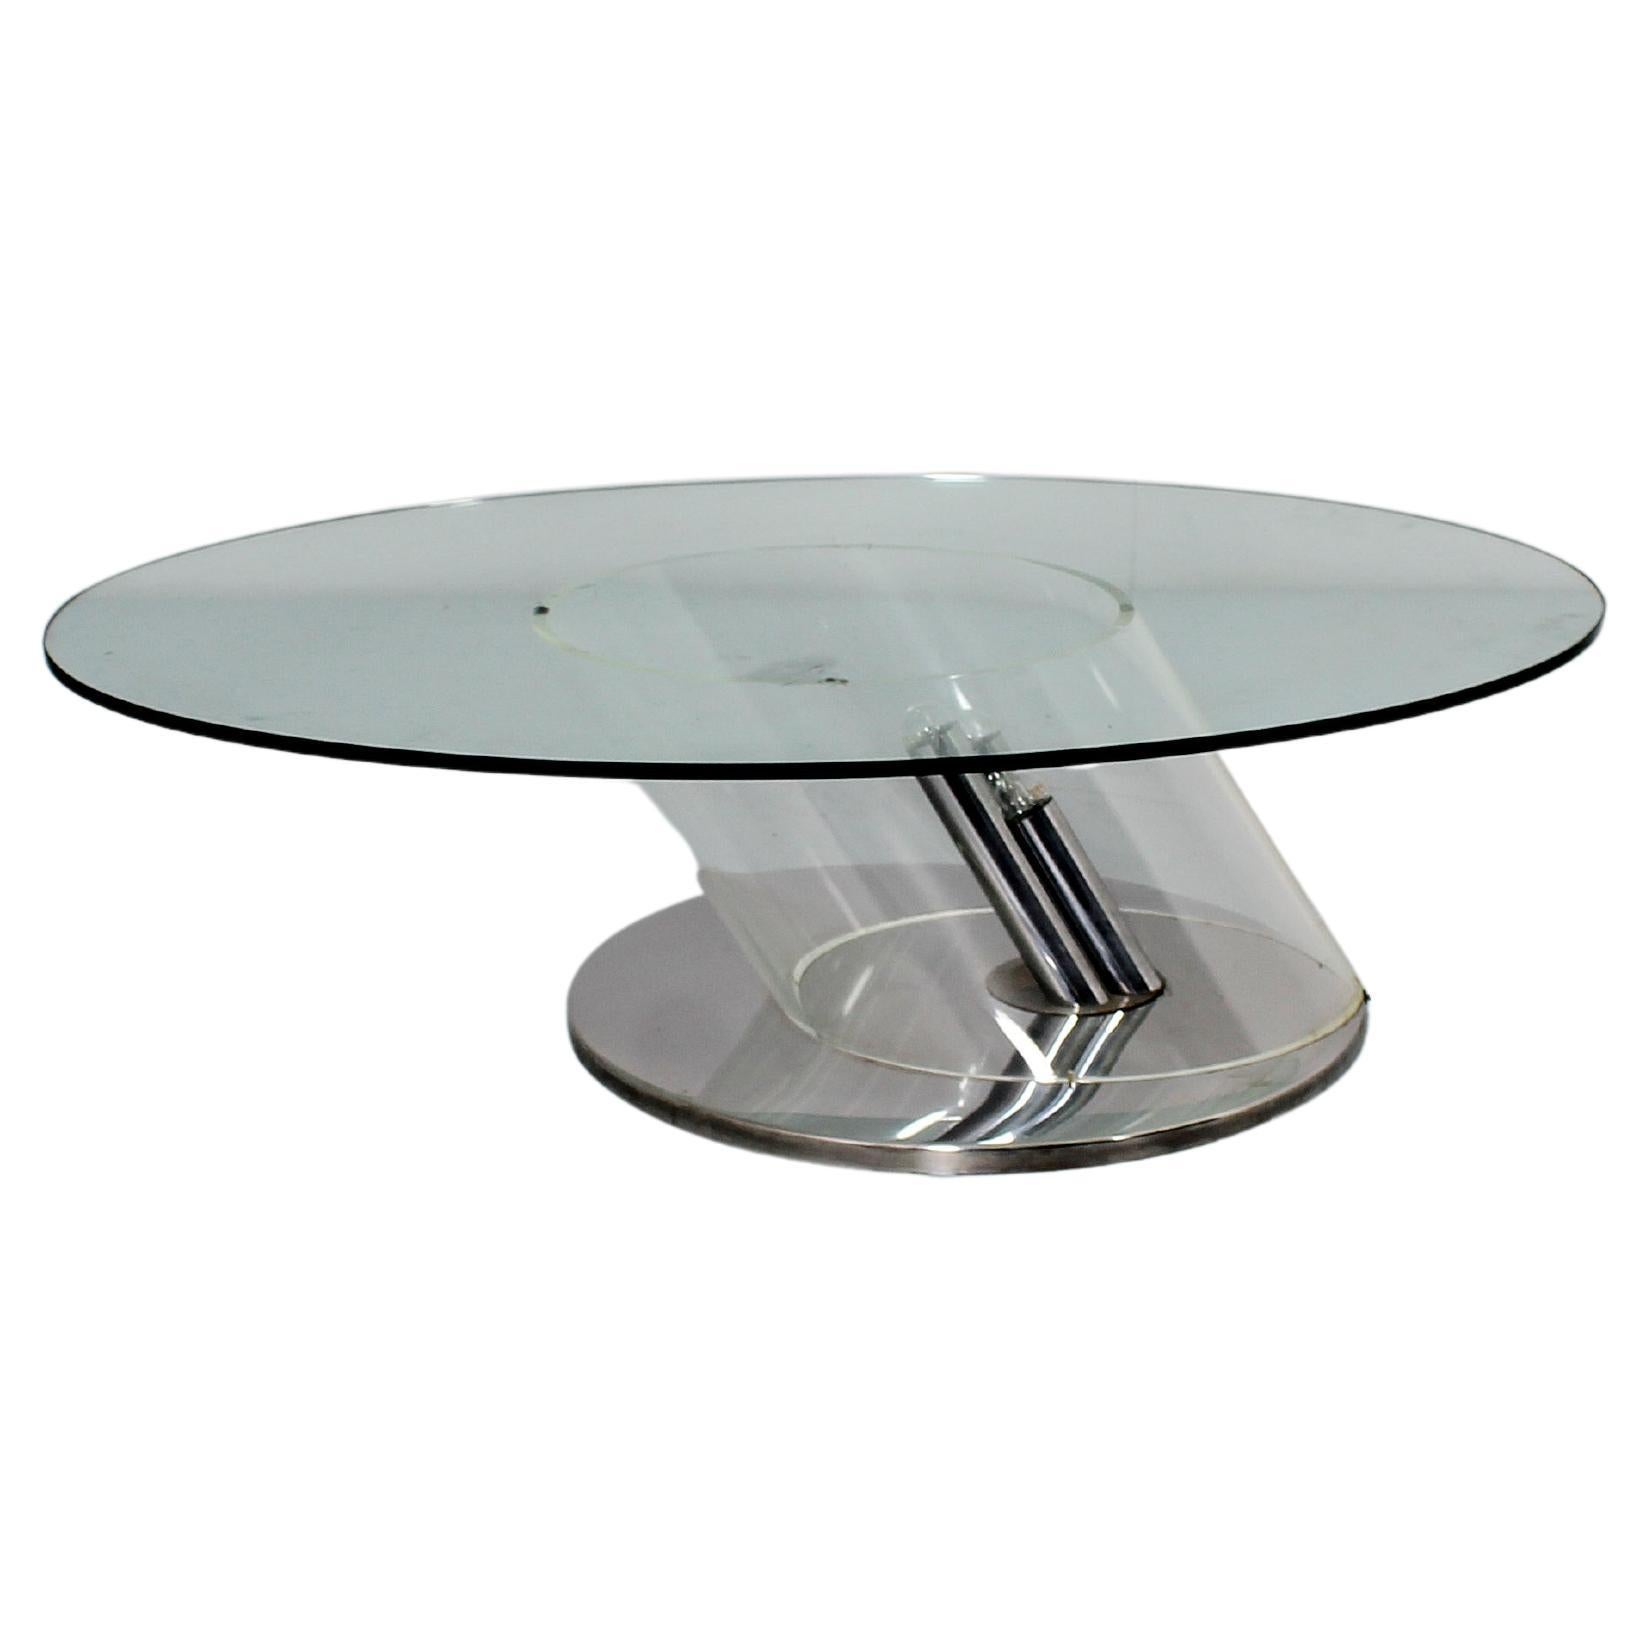 Rimadesio Mod. "Ipomea" Glass and Steel Coffee Table with Spot Lights 70s Italy